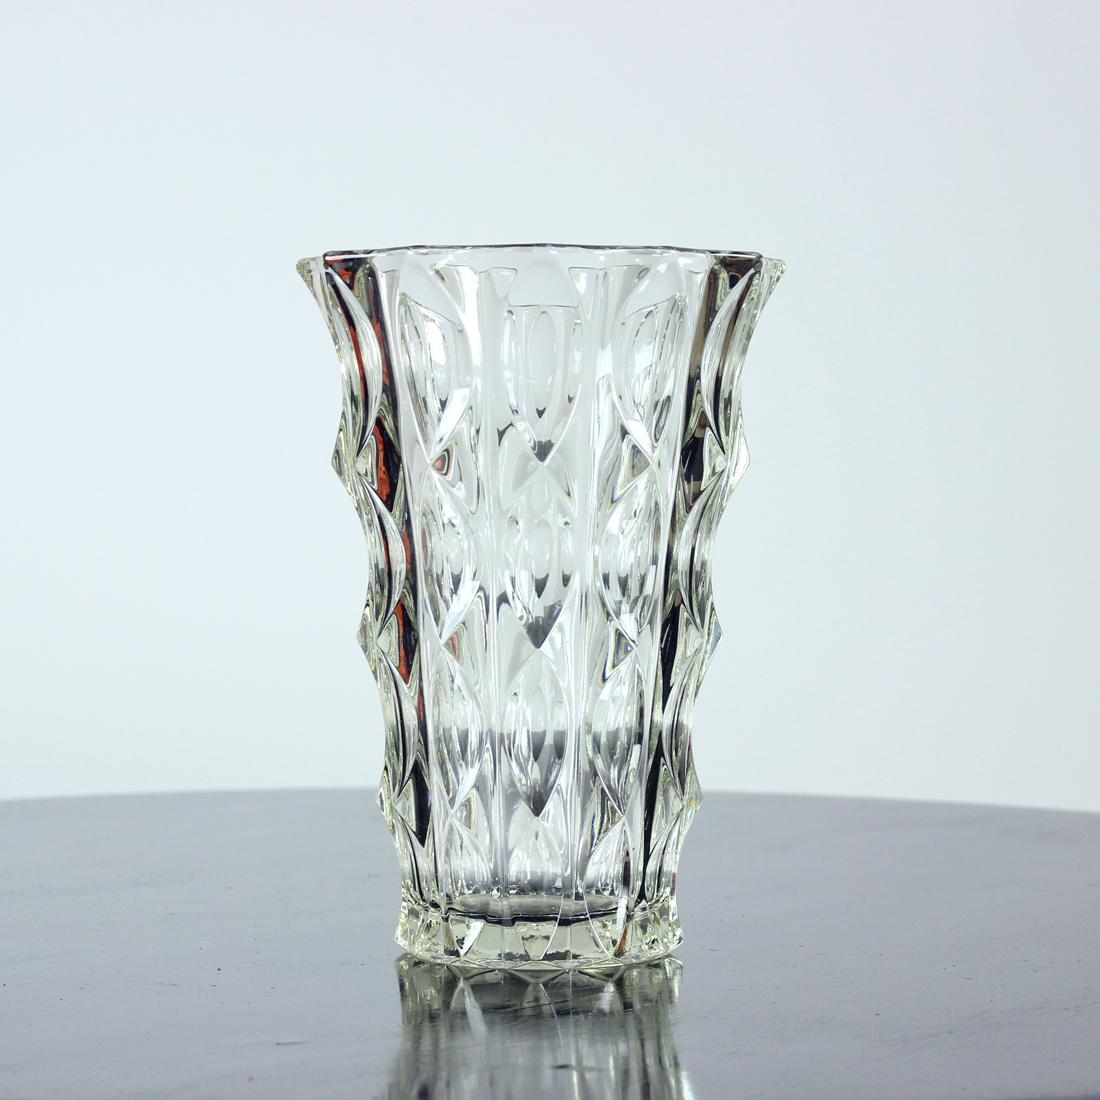 Large vintage vase in clear, pressed glass. Produced in 1960s by Rosice, designed by Vladislav Urban. Beautiful piece in great condition without any wear. The Czech glass designers of the midcentury era produced amazing items with a great style and